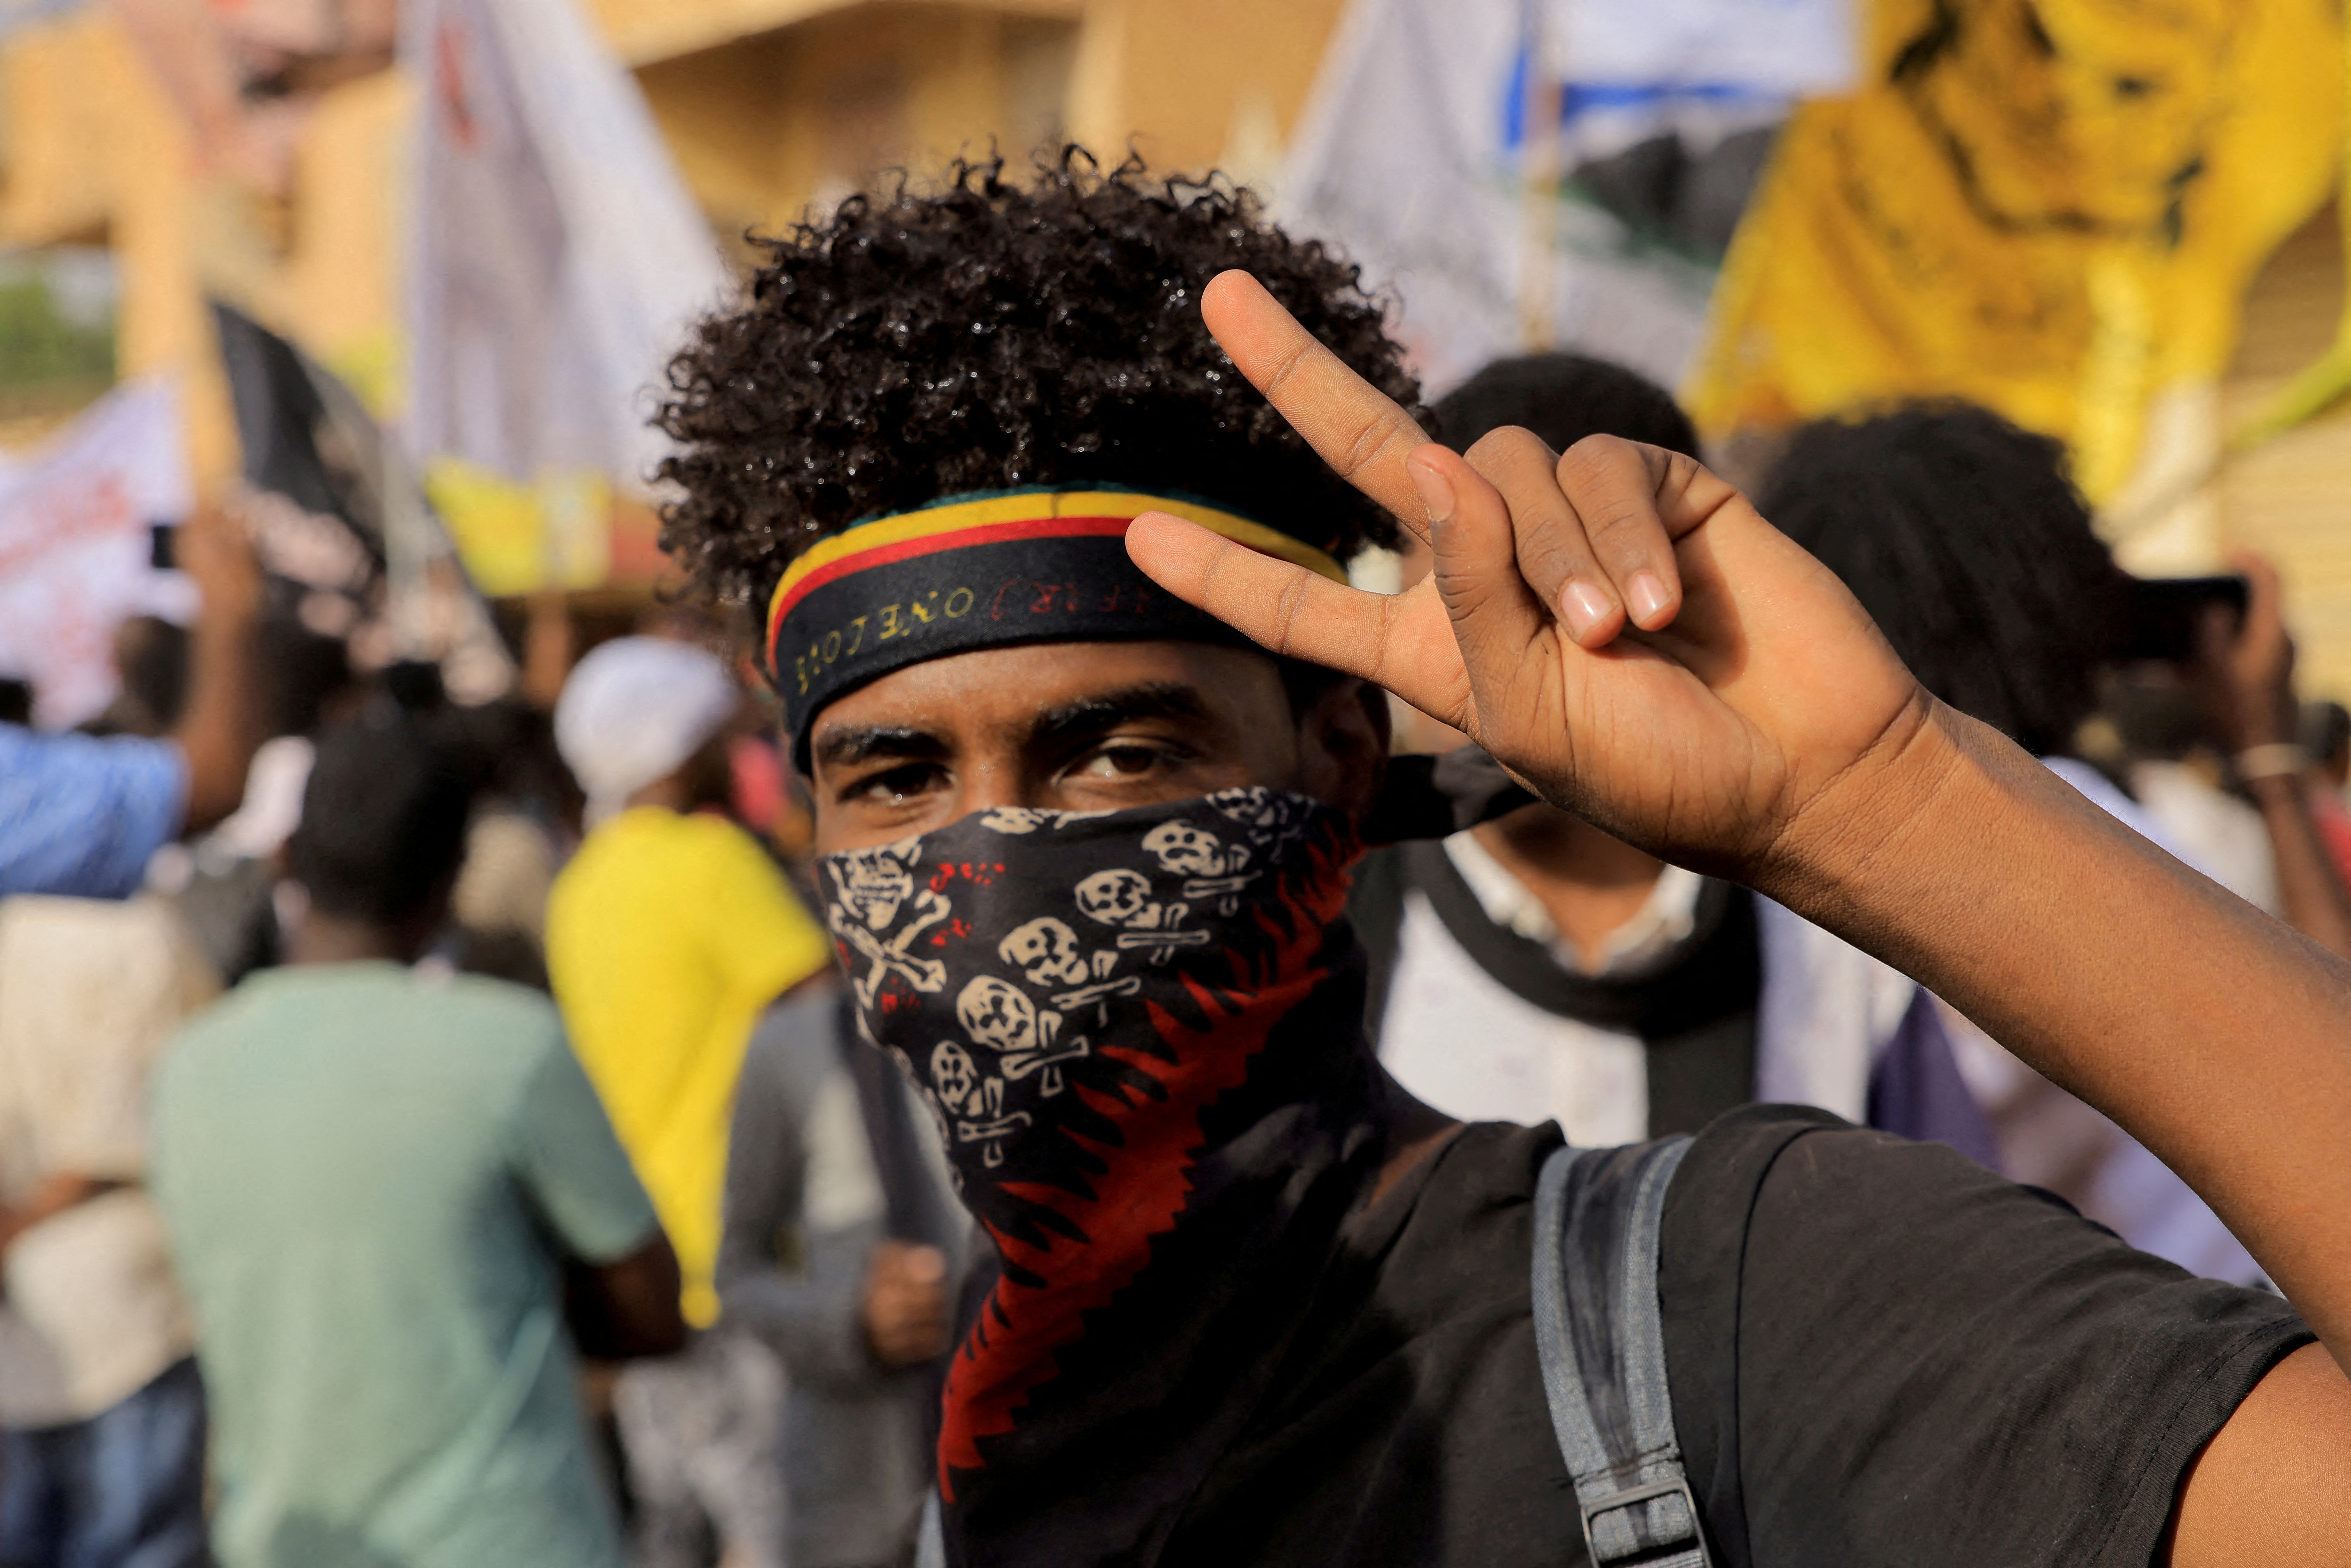 Protesters march during a rally against military rule